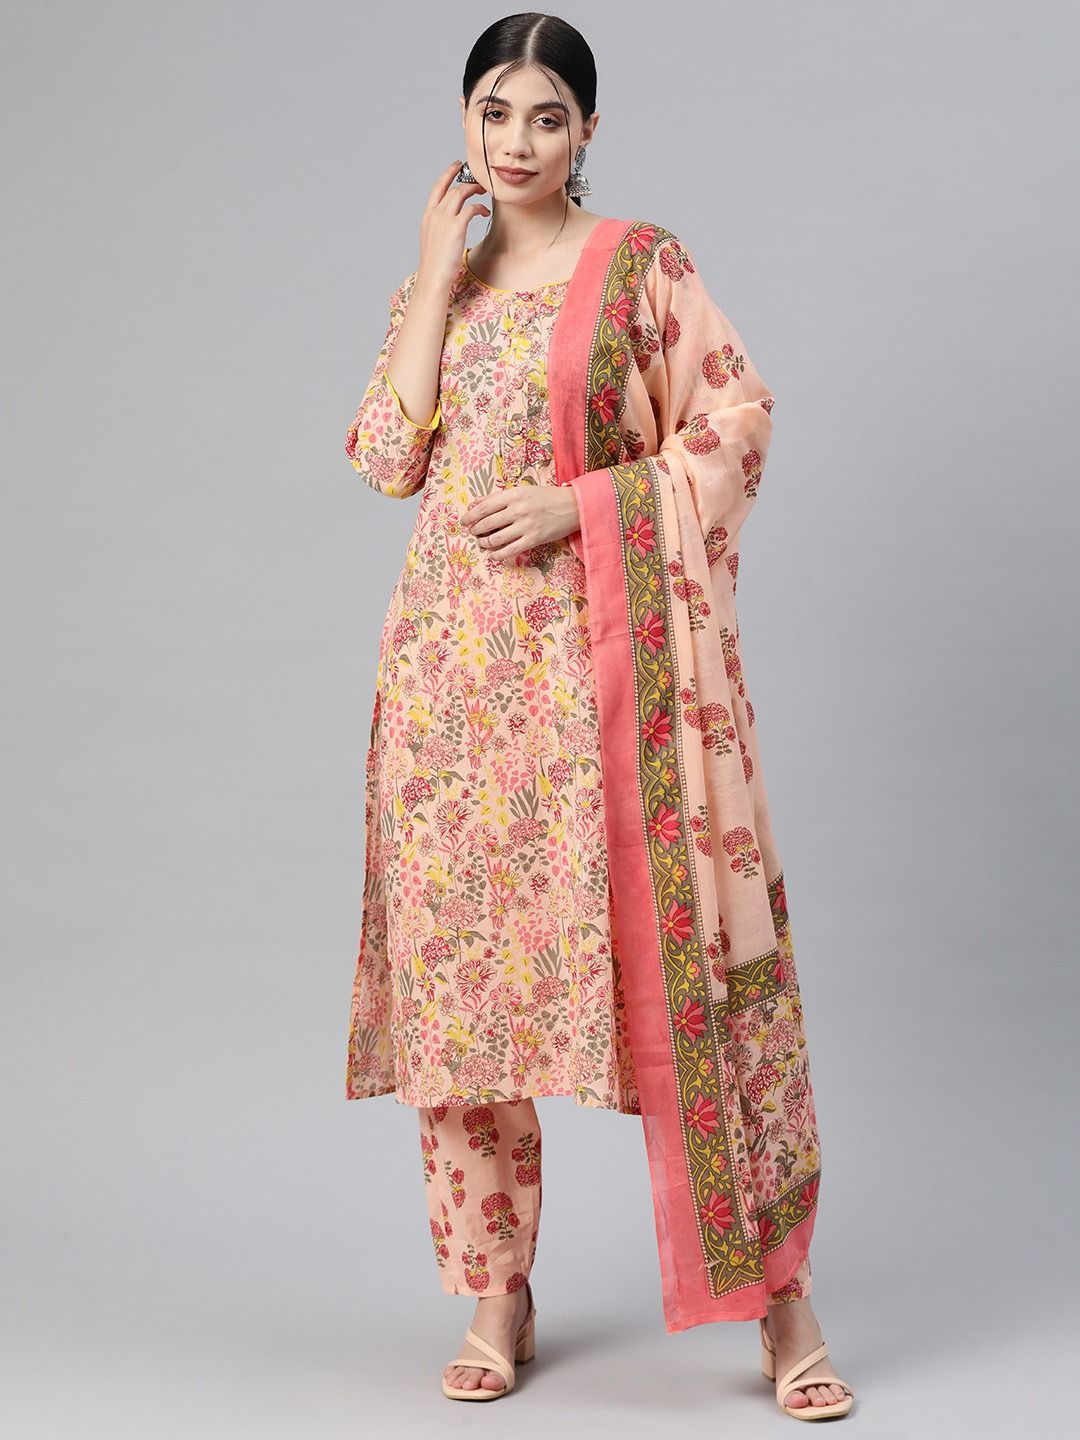 Straight Style Cotton Fabric Peach Color Kurti And Bottom With Dupatta